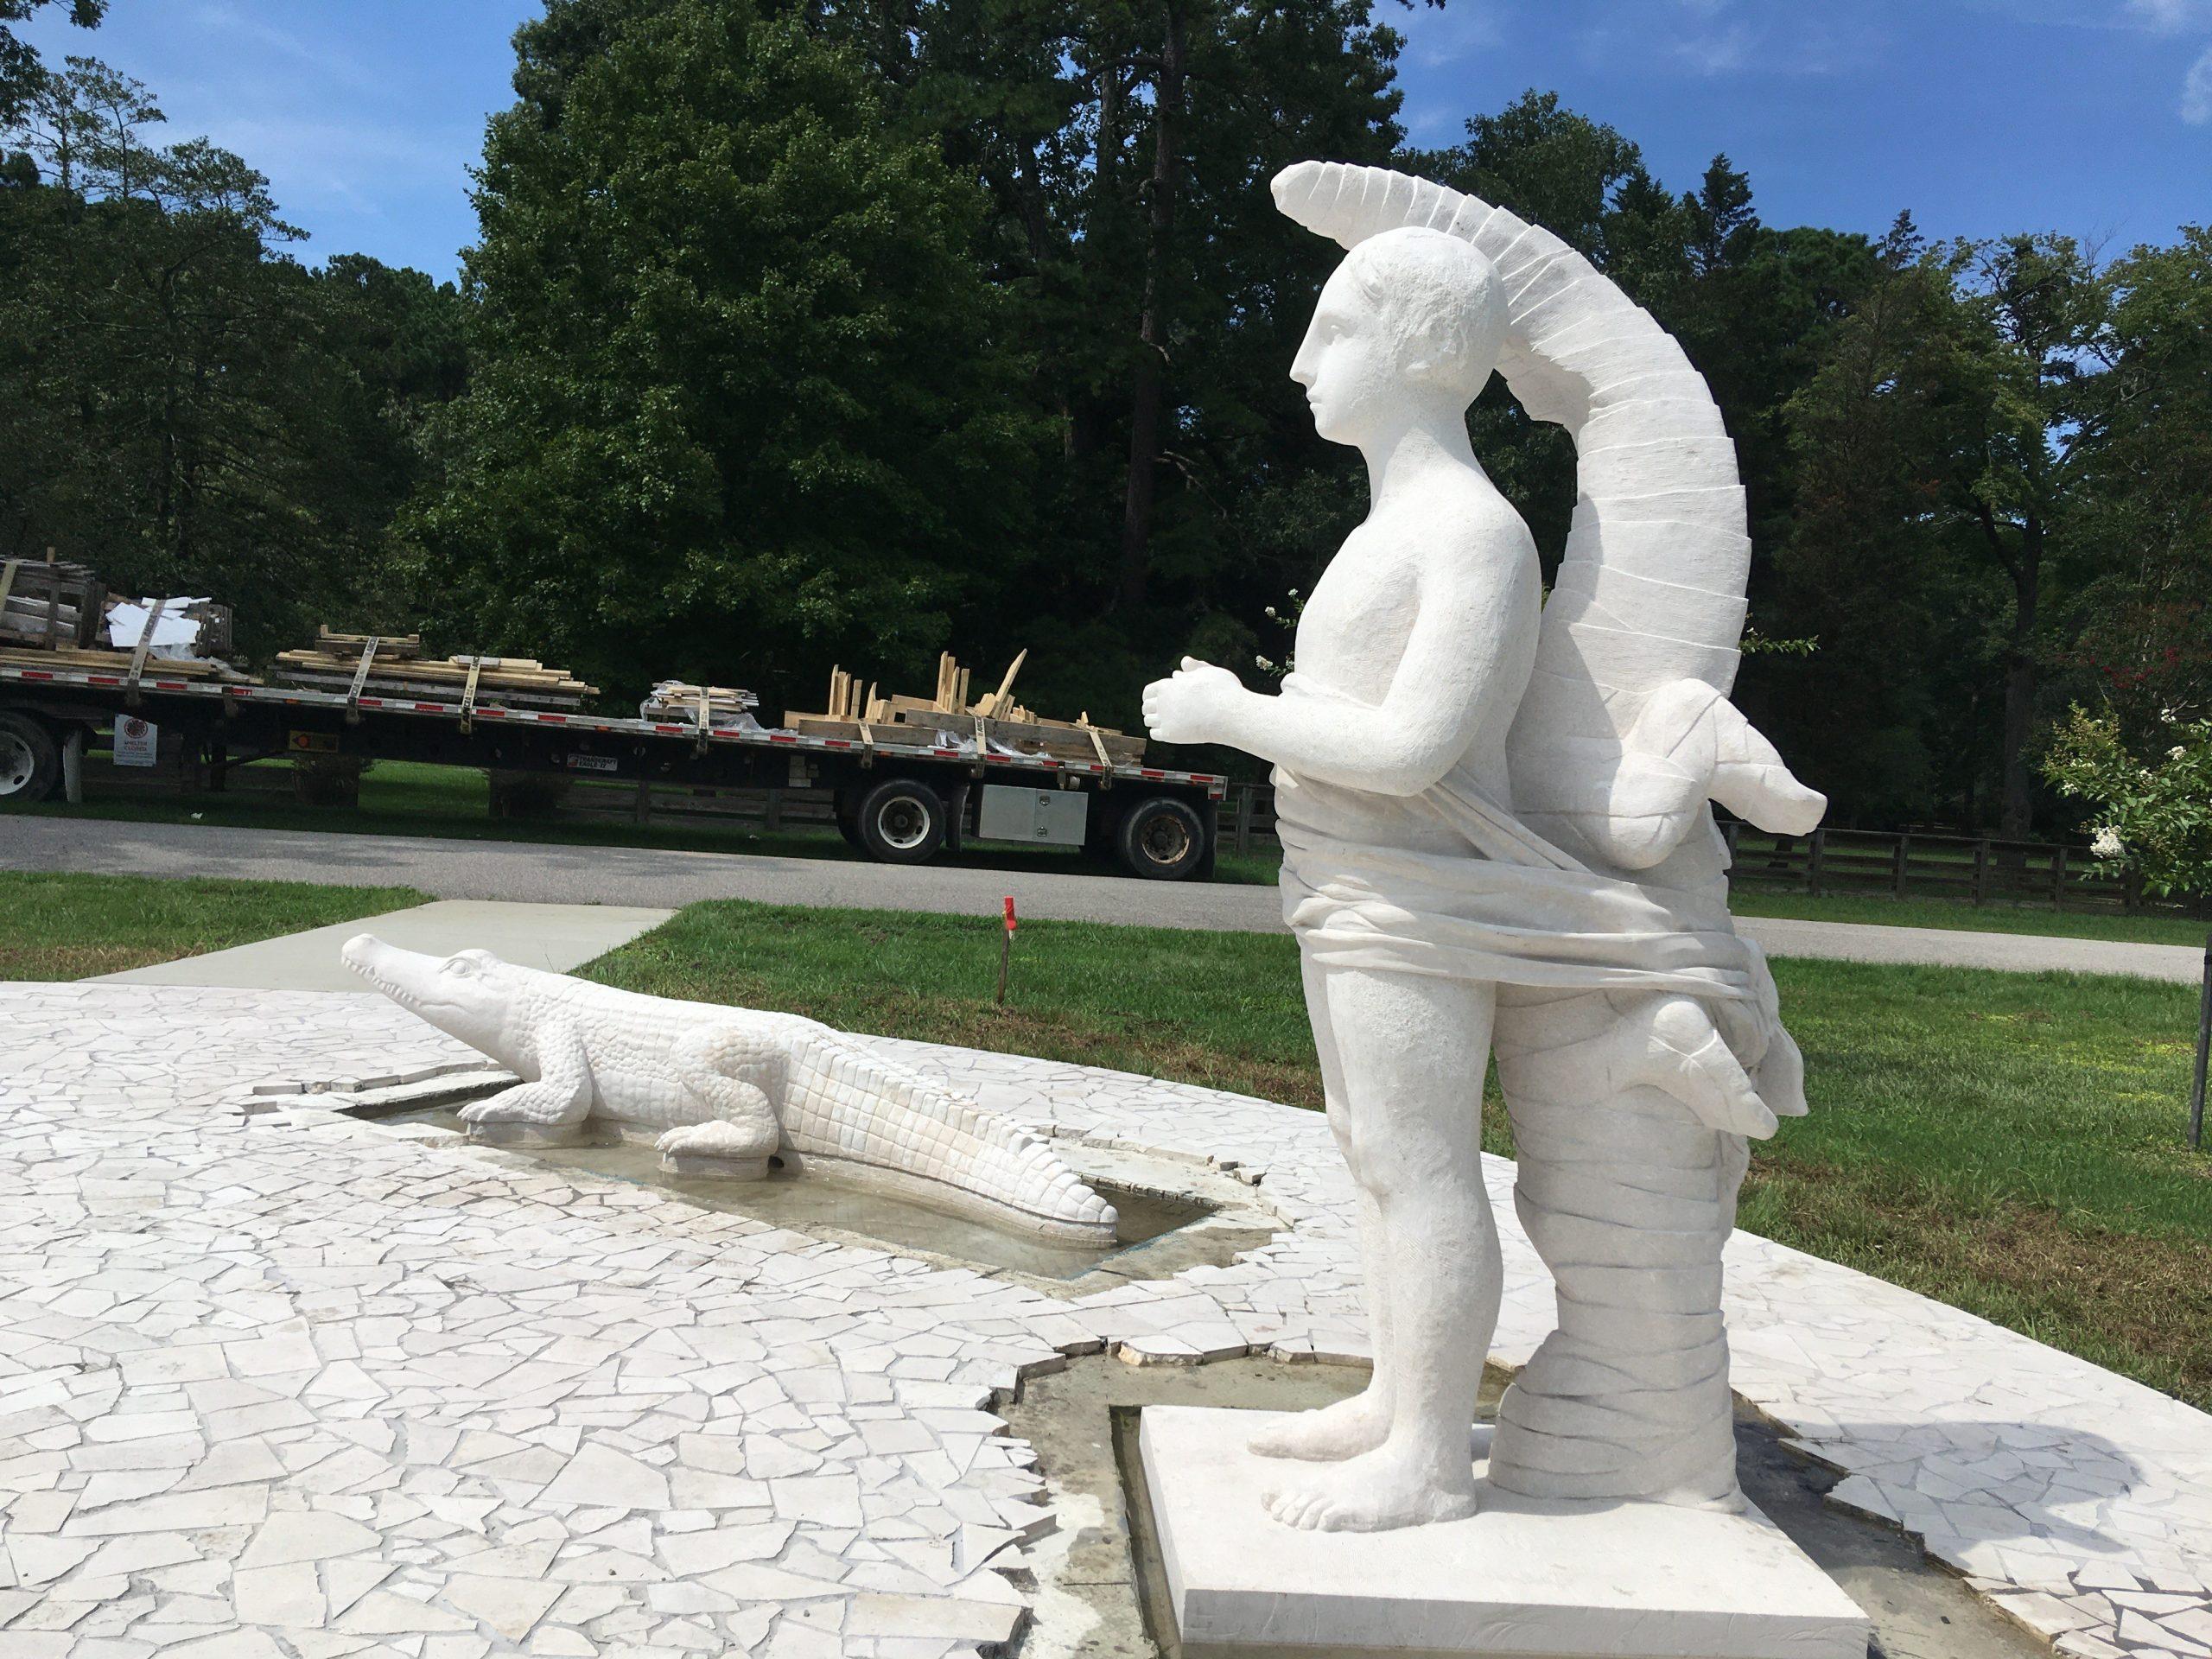 Our 21st sculpture just installed!